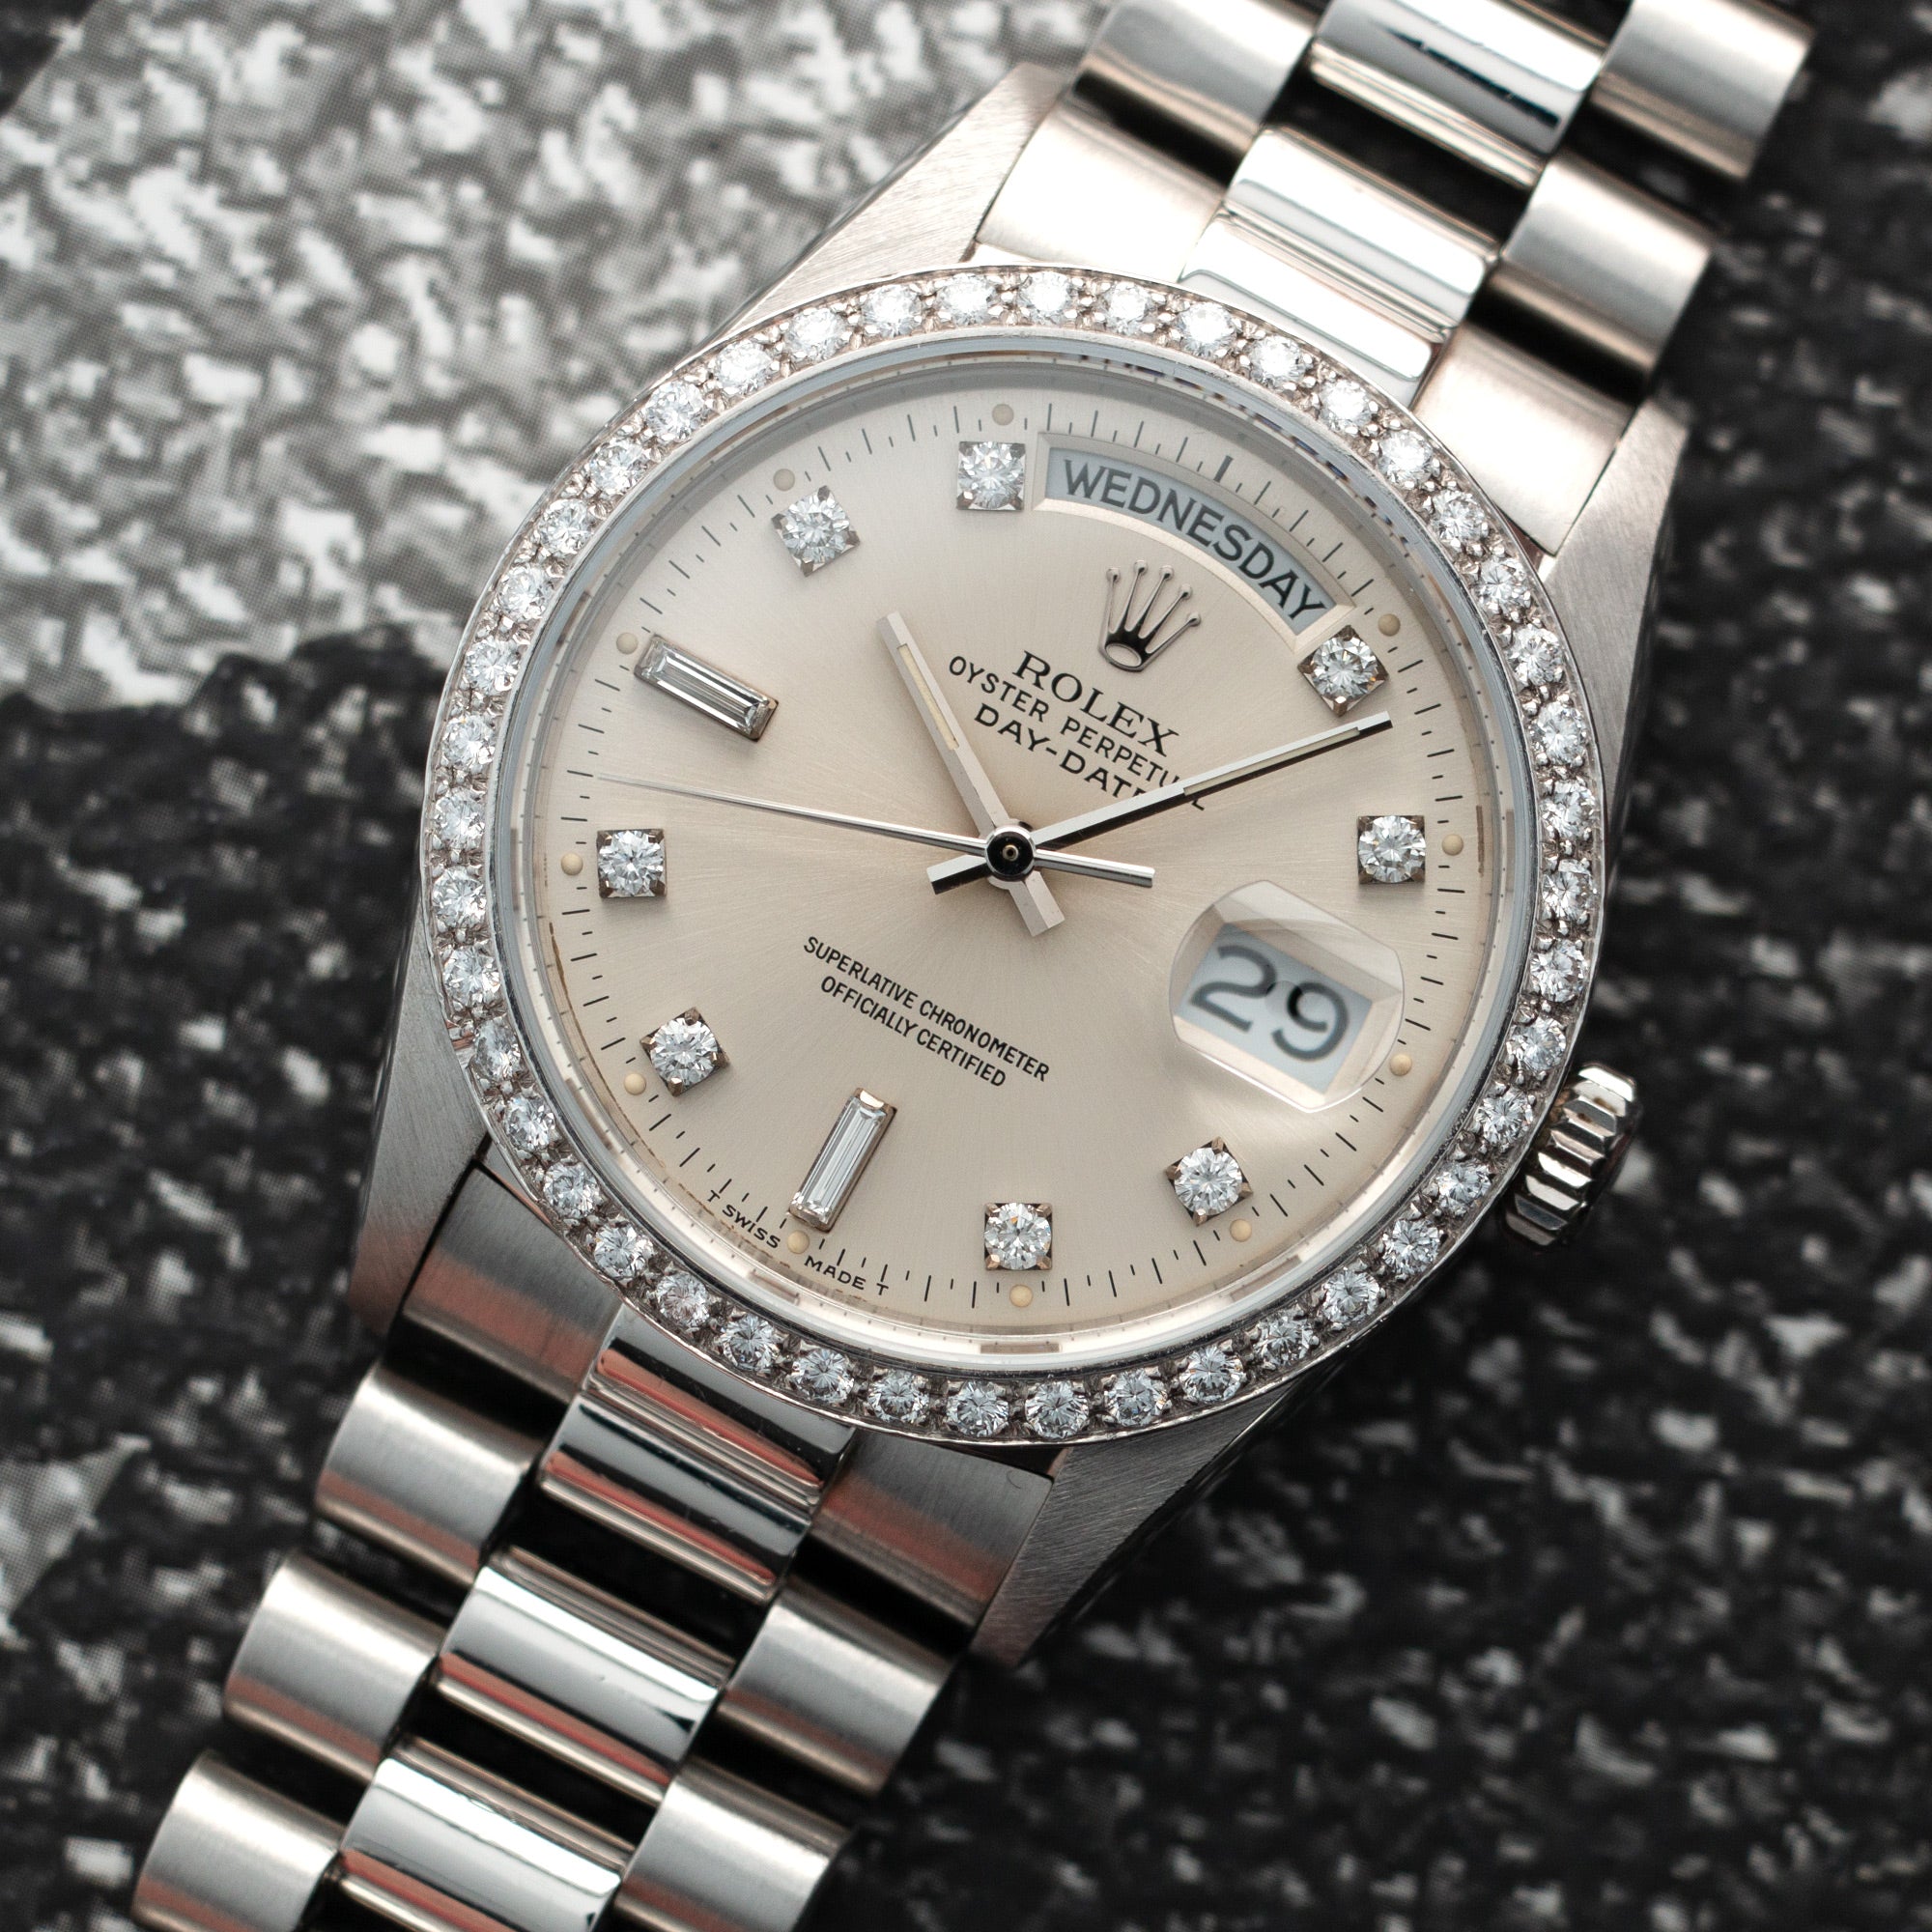 Rolex Platinum Day-Date Ref 18046 with Diamond Bezel and Diamond Dial